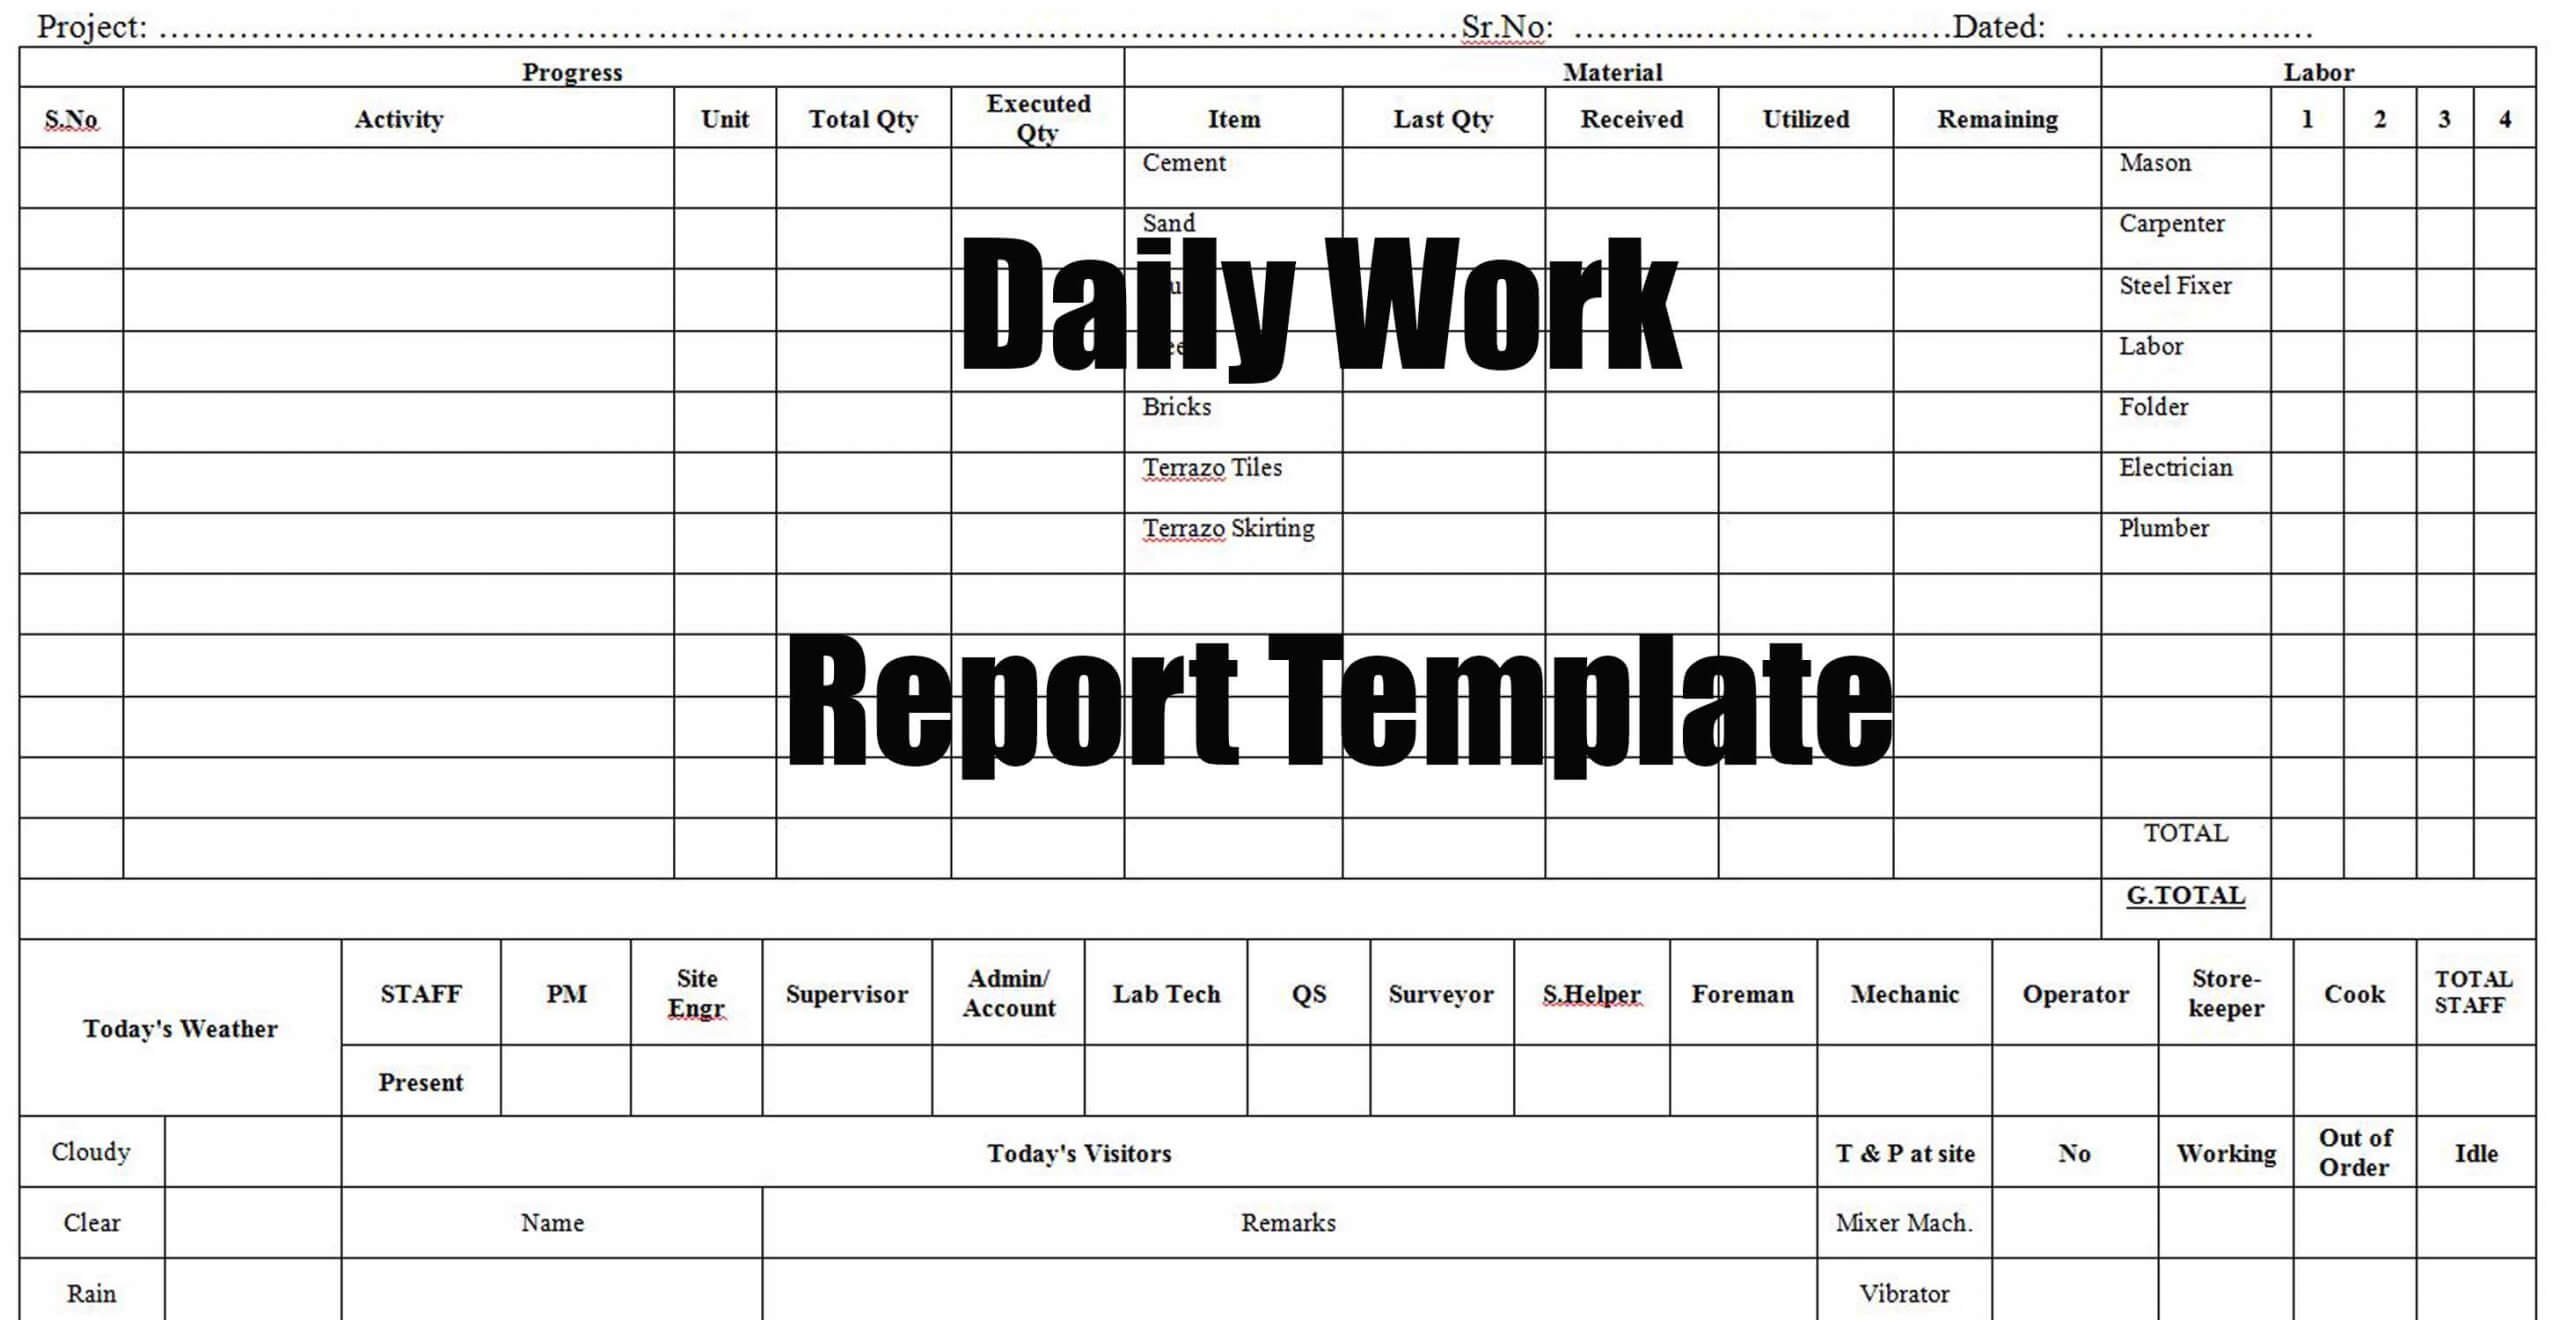 Daily Work Report Template - Engineering Discoveries Pertaining To Engineering Progress Report Template